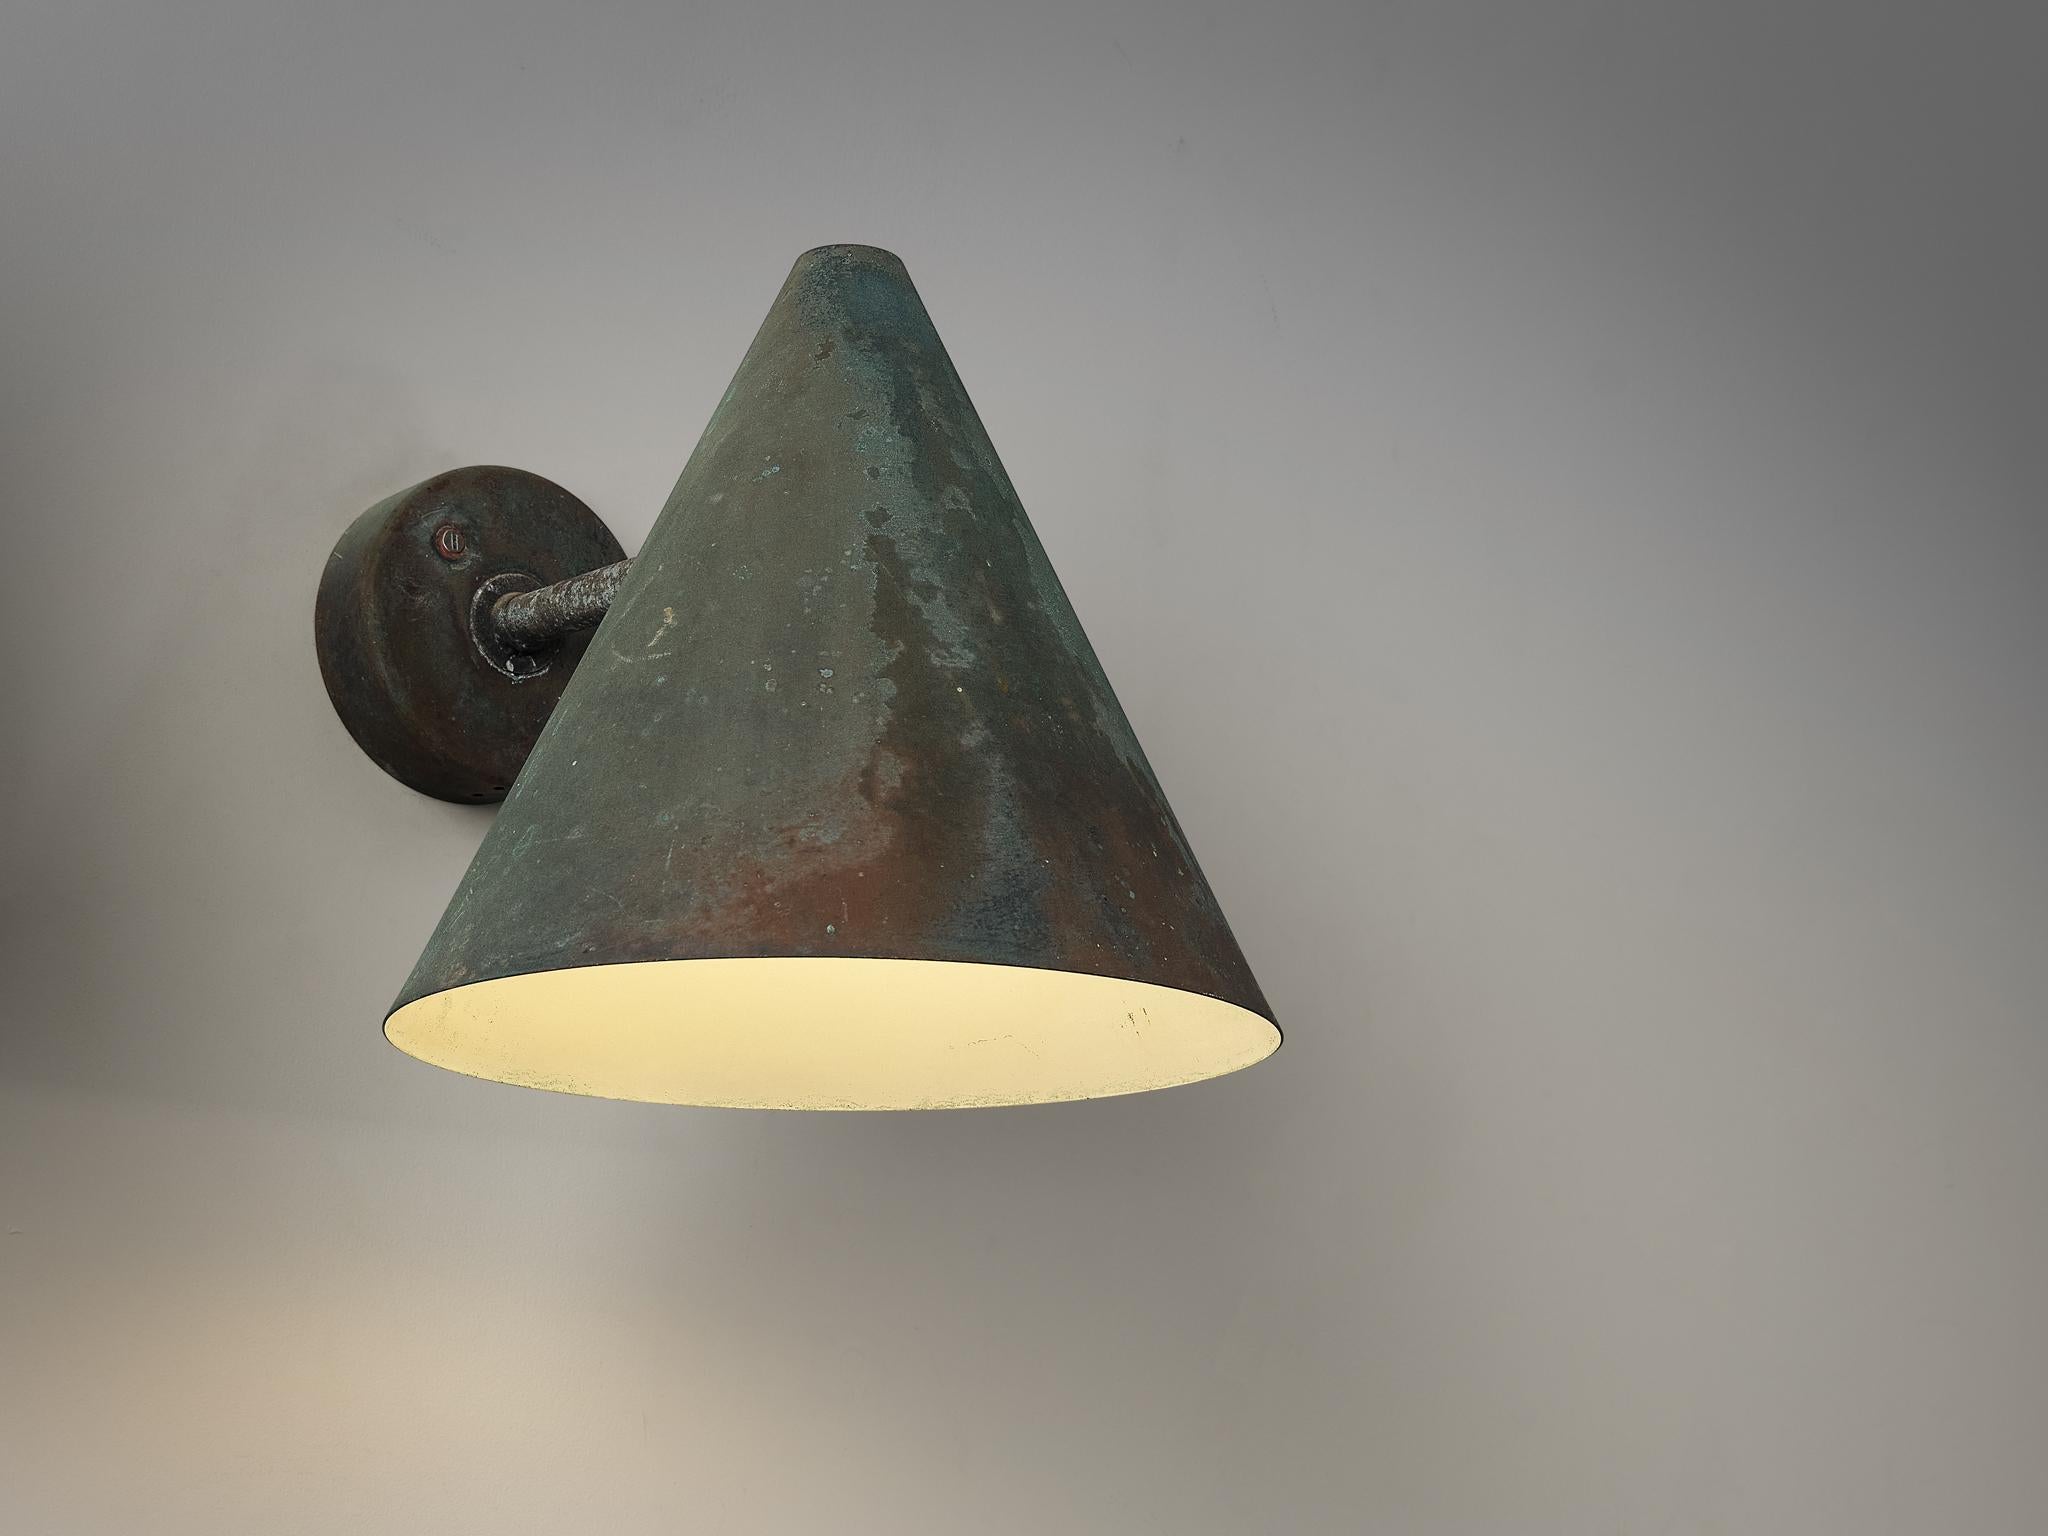  Hans-Agne Jakobsson 'Tratten' Wall Lights in Patinated Copper  2